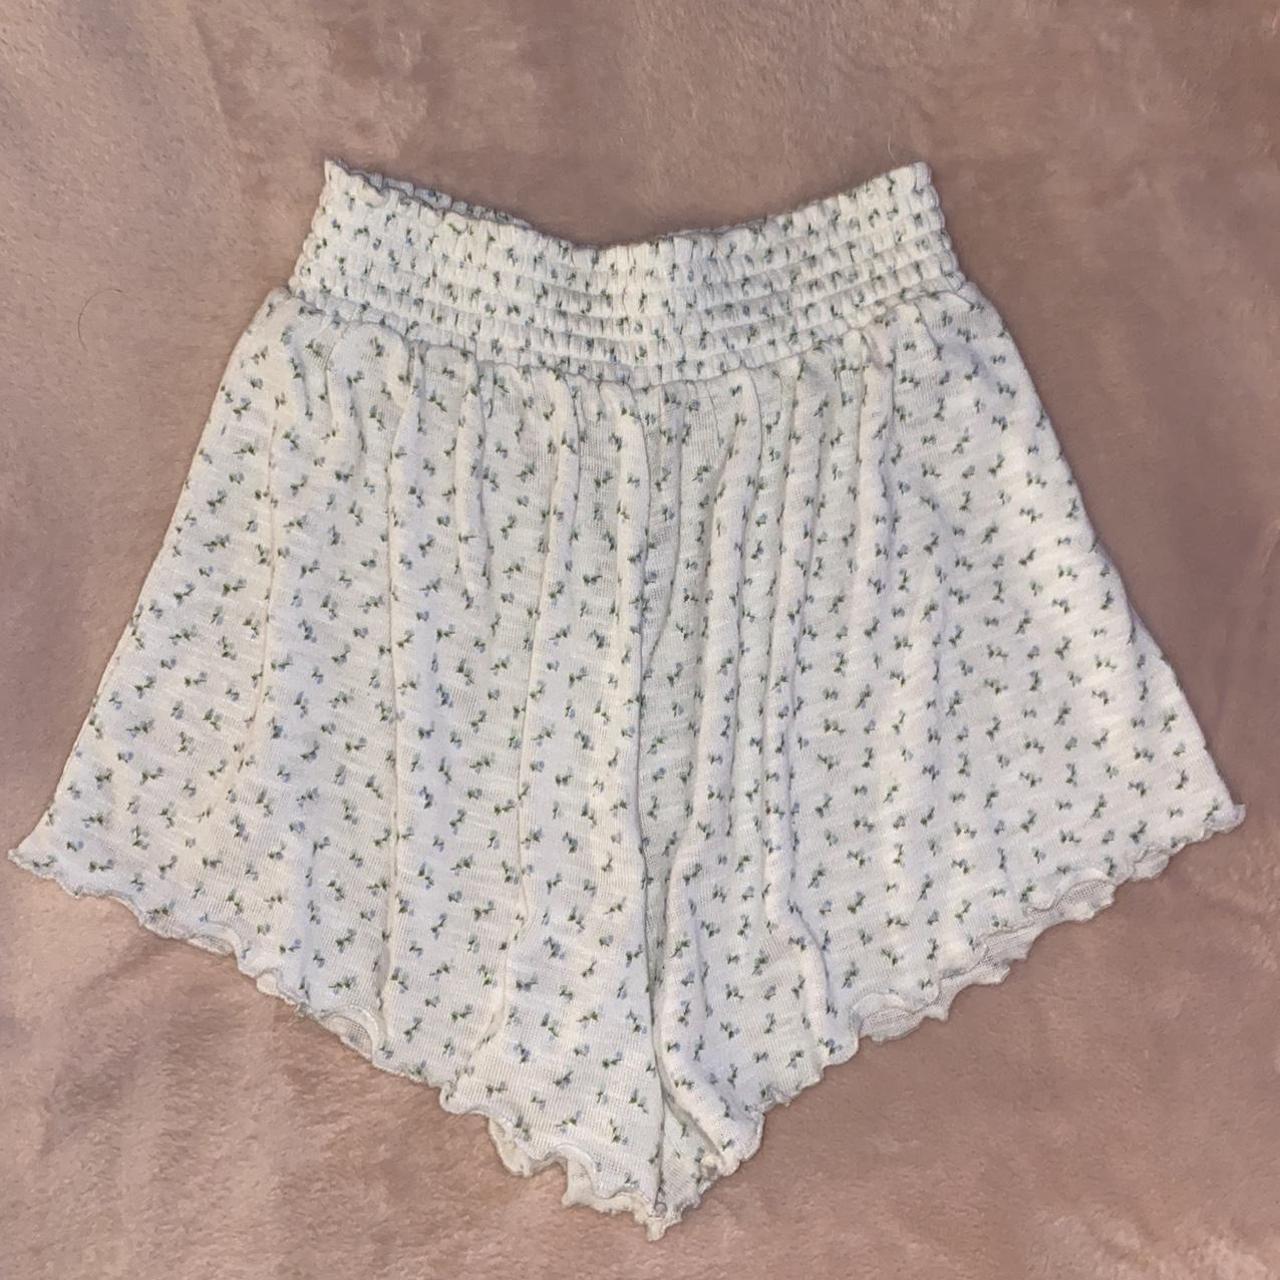 Floral sleep shorts Fairy vibes so cute 🧚🏾‍♀️ Will fit - Depop